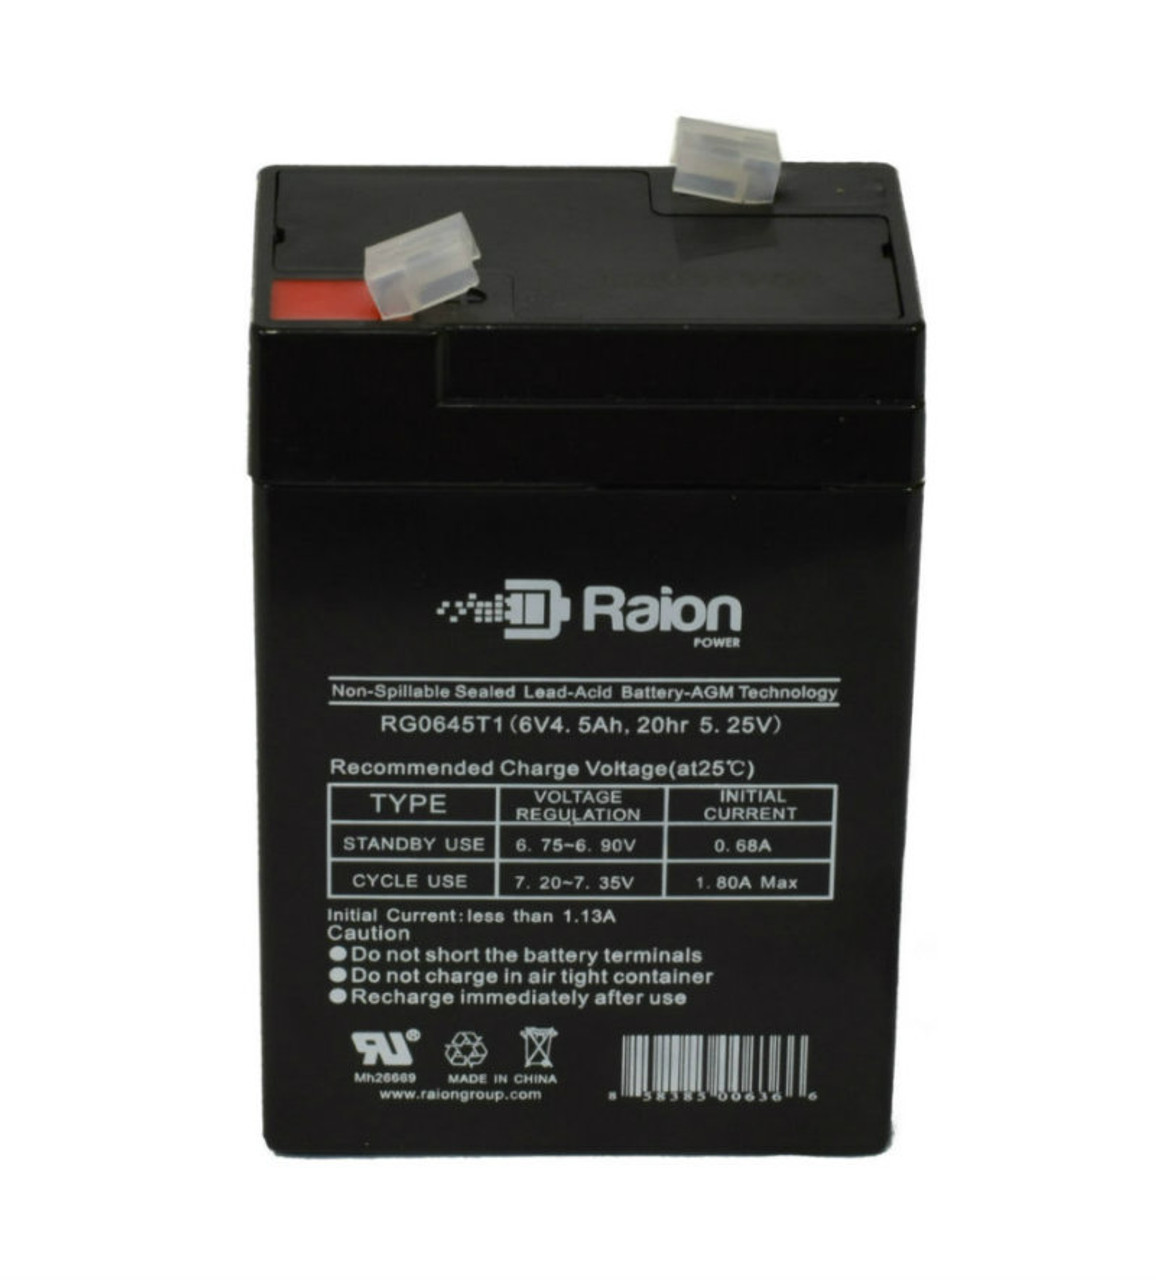 Raion Power RG0645T1 Replacement Battery Cartridge for RS Pro 537-5422